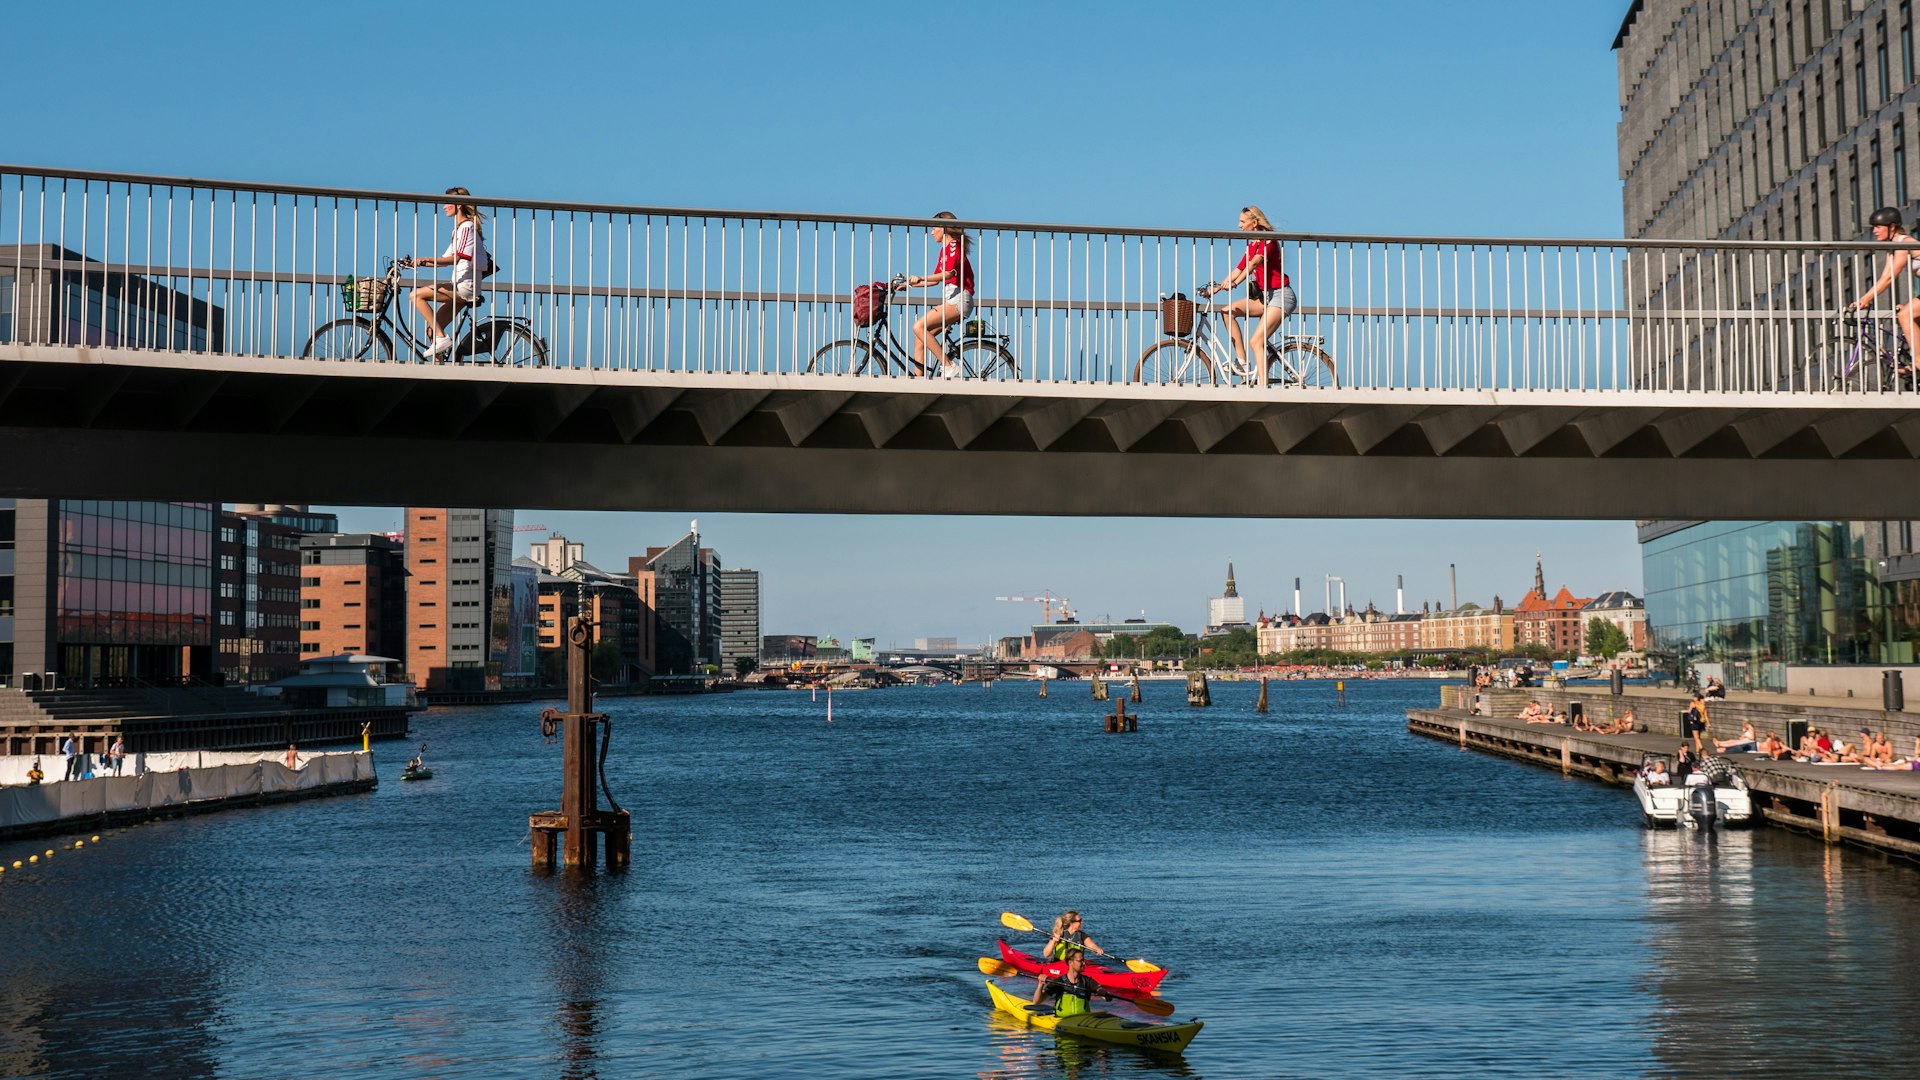 People cycling over a bridge while others kayak in the water below them in Copenhagen